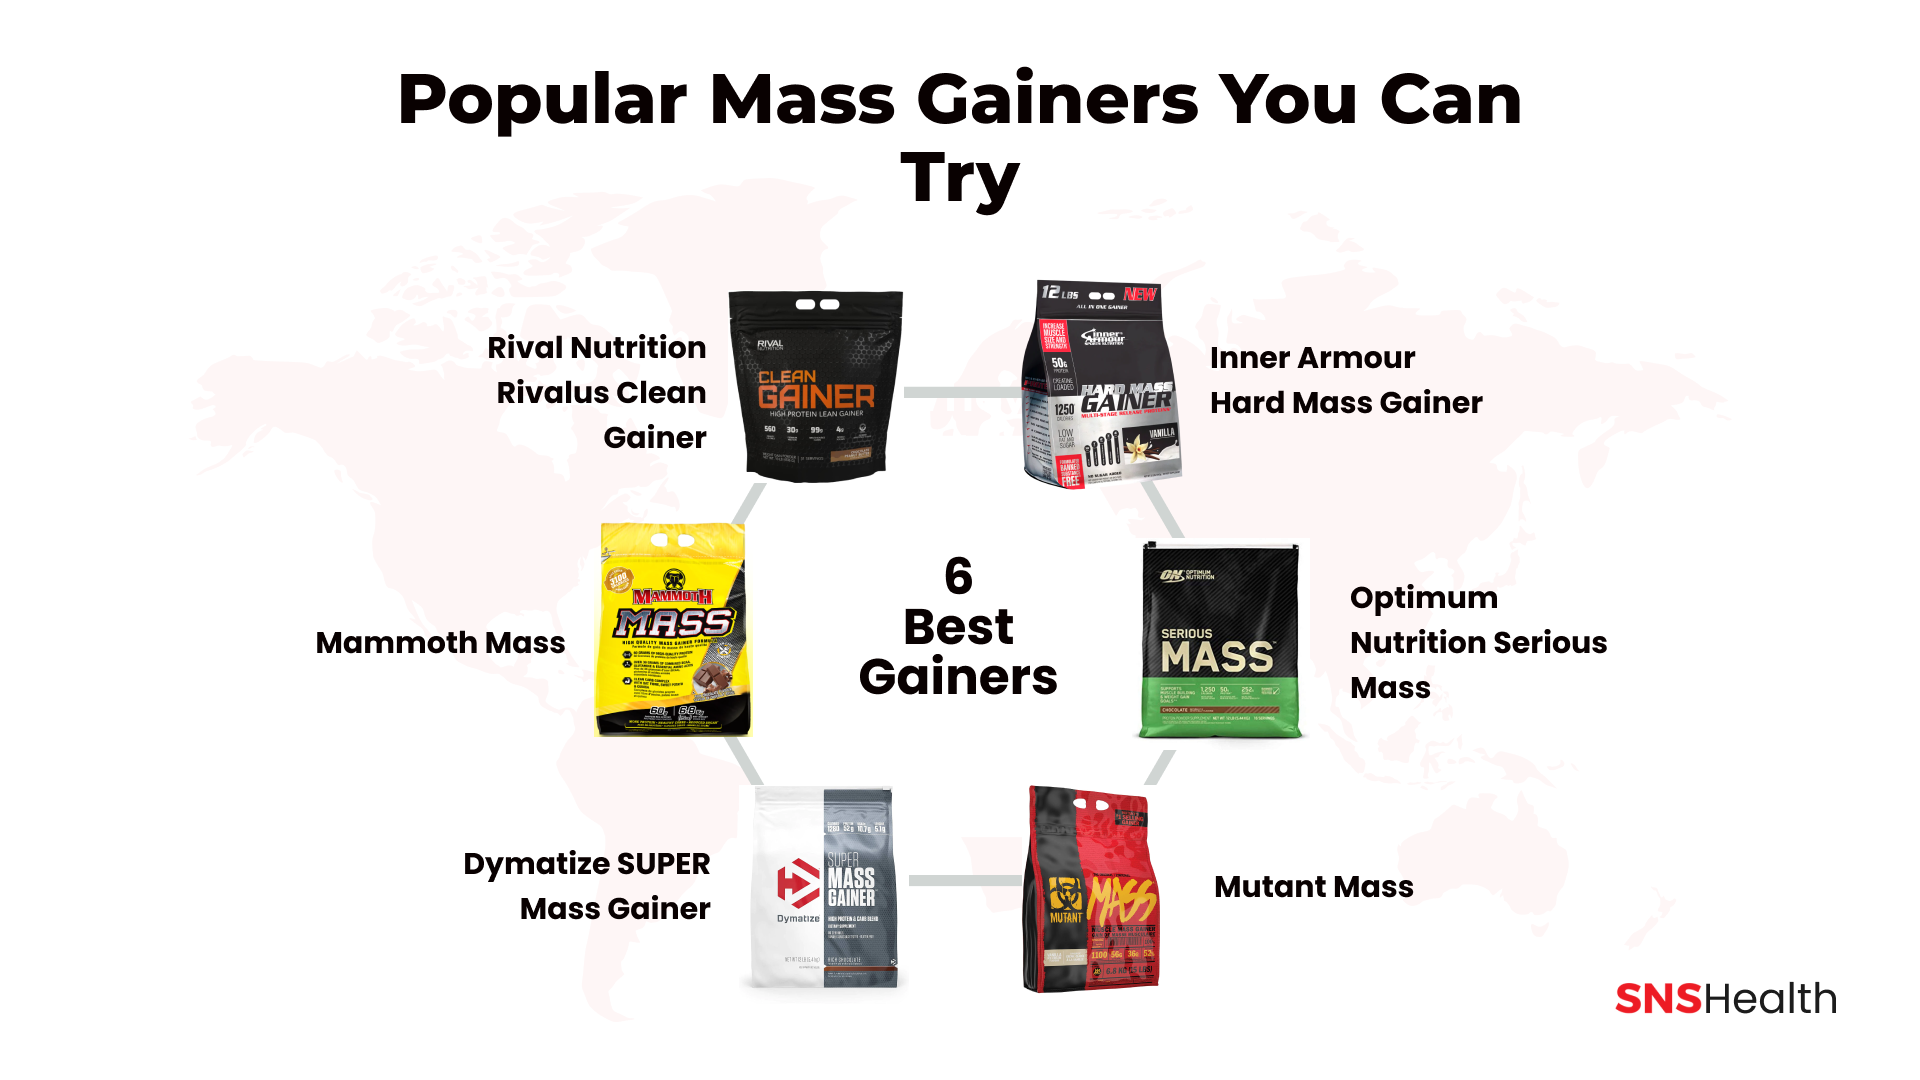 Popular Mass Gainers You Can Try